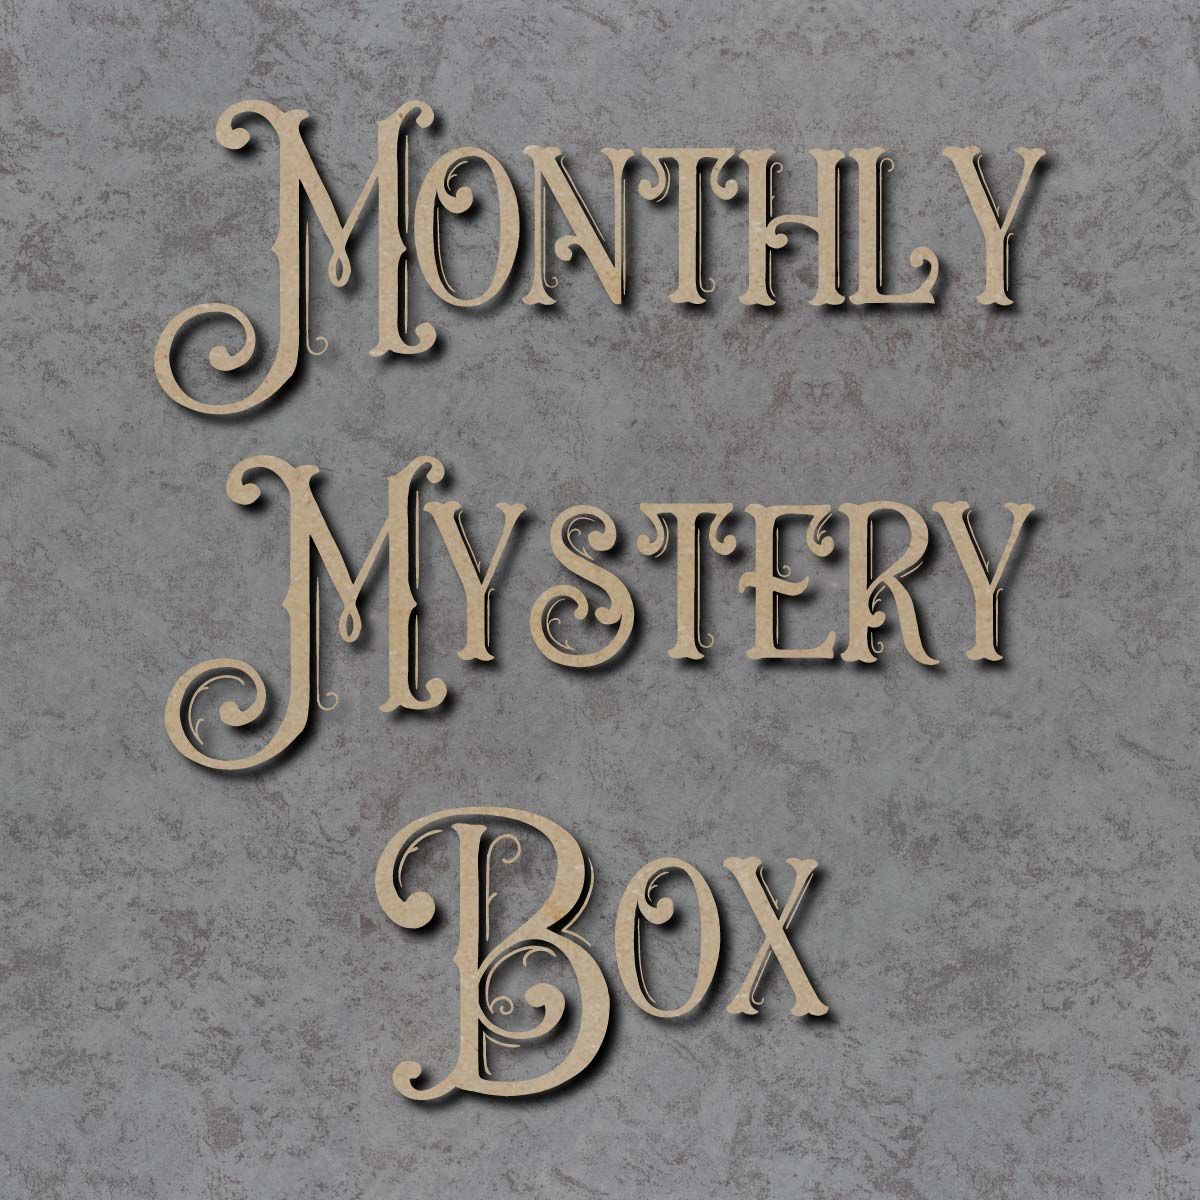 Monthly Mystery Box